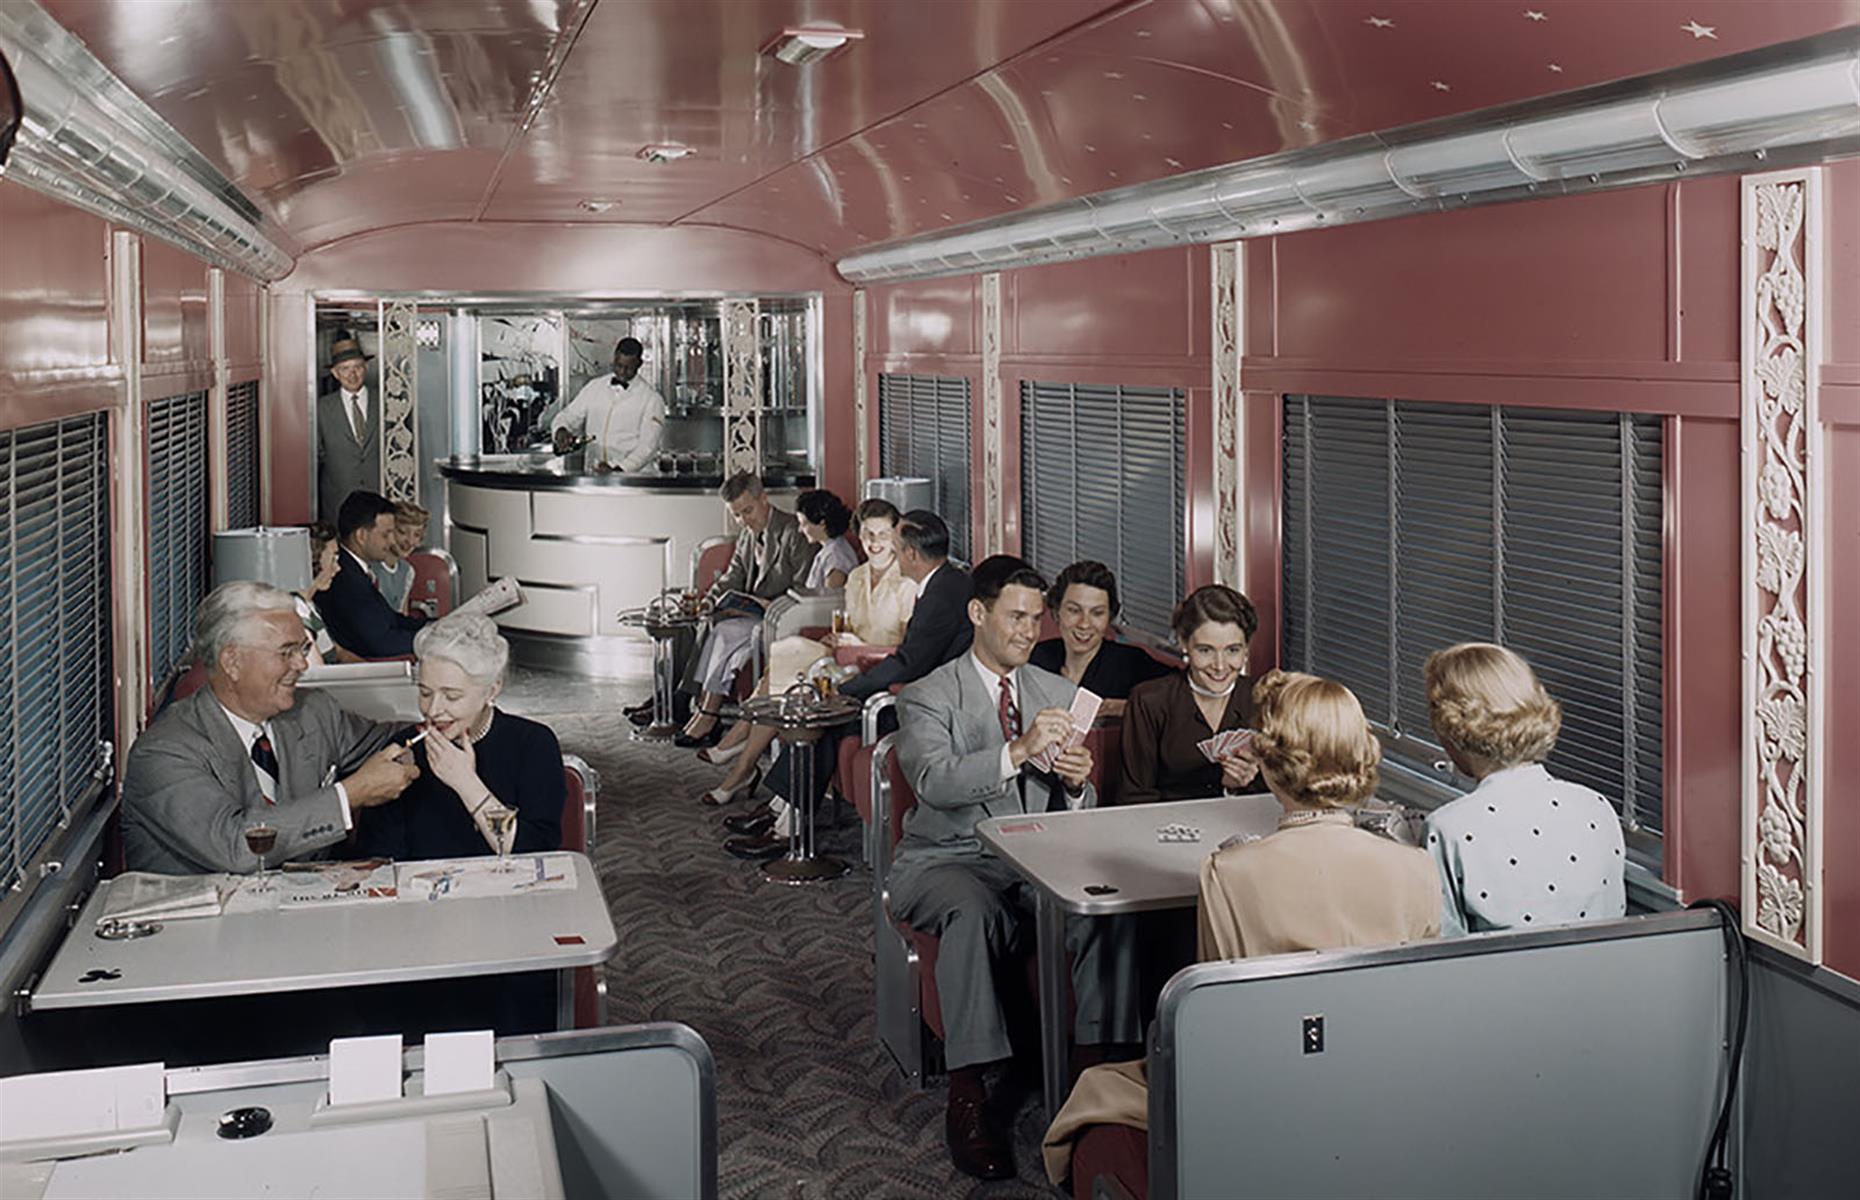 Operated by the Southern Pacific Railroad, Sunset Limited was a route connecting New Orleans with Los Angeles. The oldest named train in the US, Sunset Limited started operations in 1894 and, having opened 20 years before the Panama Canal, offered a quicker connection between the East and West Coasts. Here, travellers are seen passing the time in one of the two lounge cars in the 1950s.